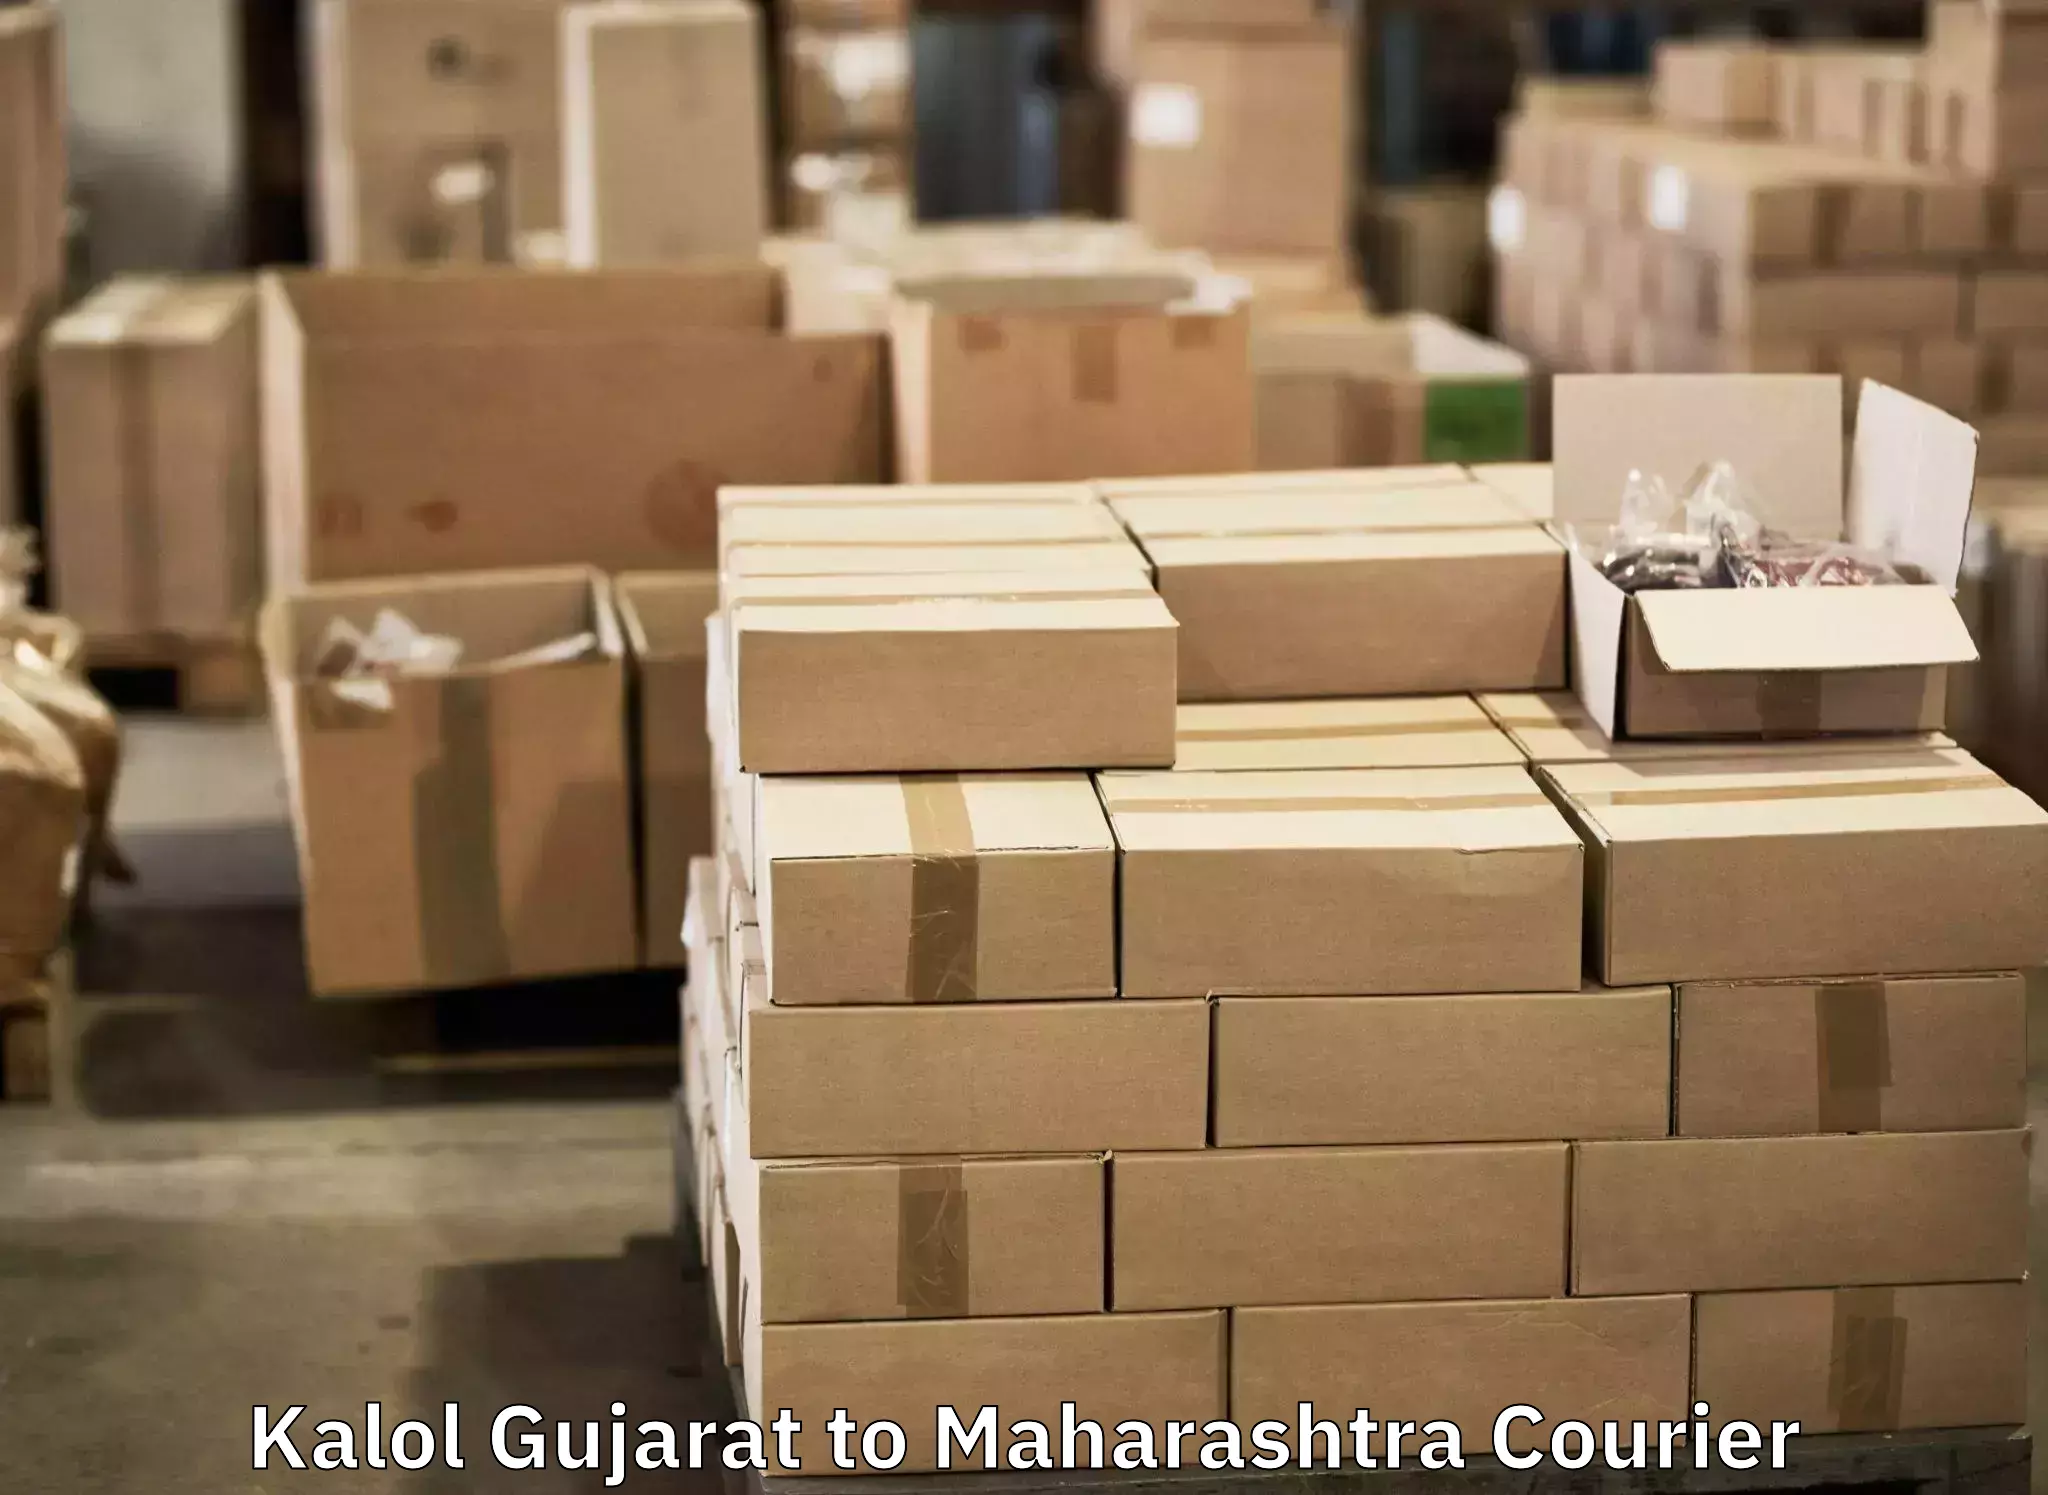 Luggage storage and delivery in Kalol Gujarat to Dadar